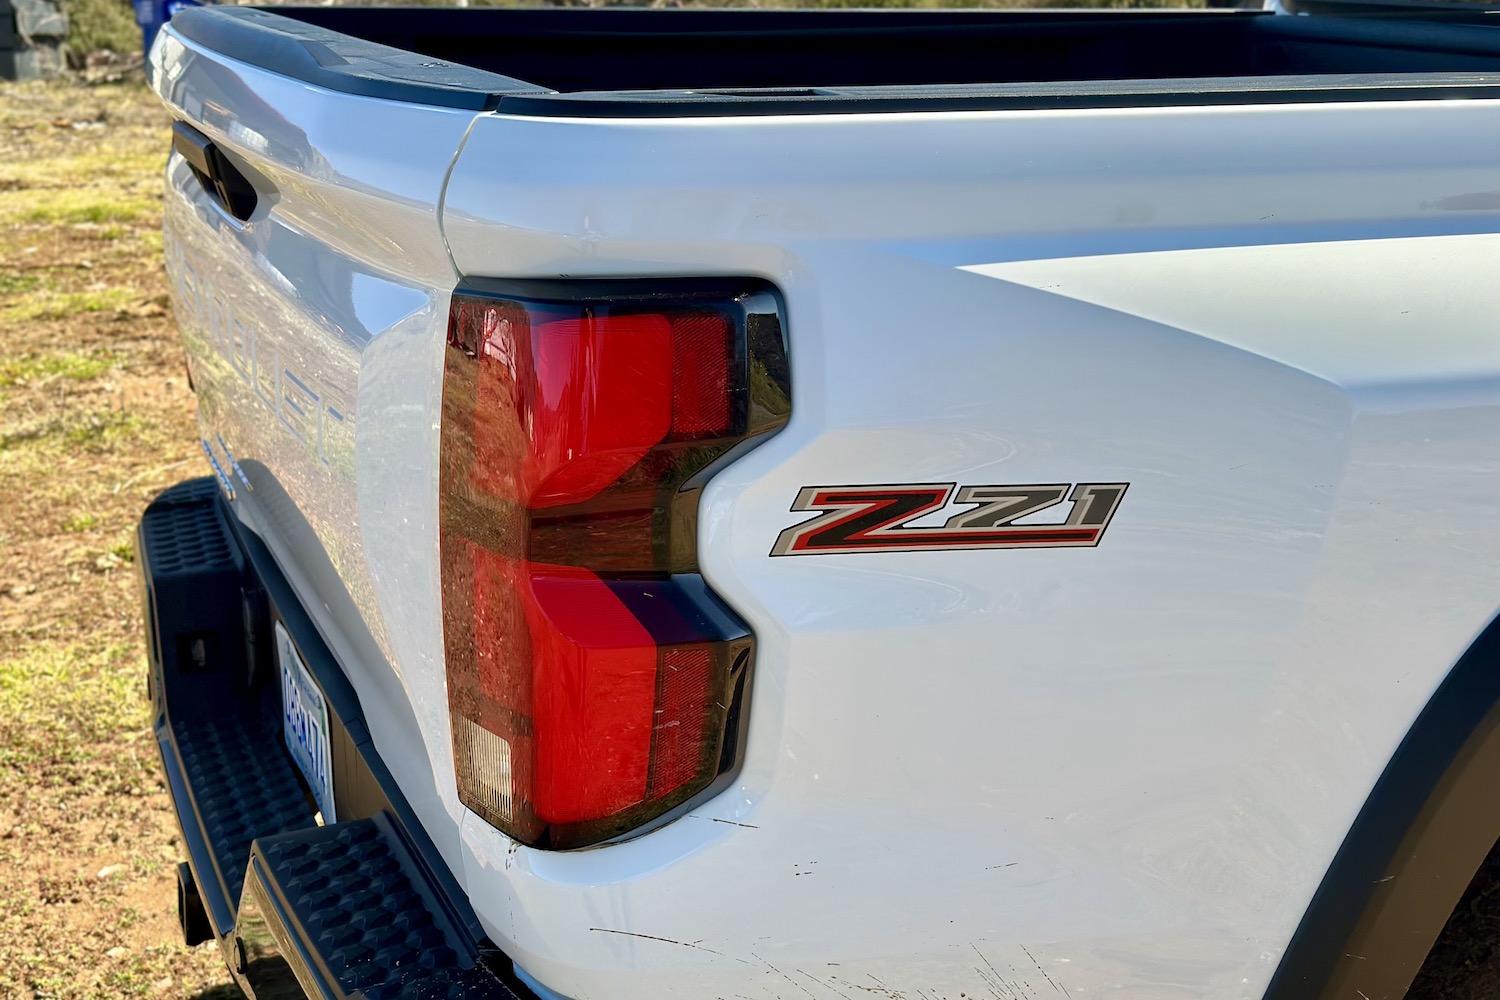 Close up of the rear taillight and rear badges on the 2023 Chevrolet Colorado Z71.